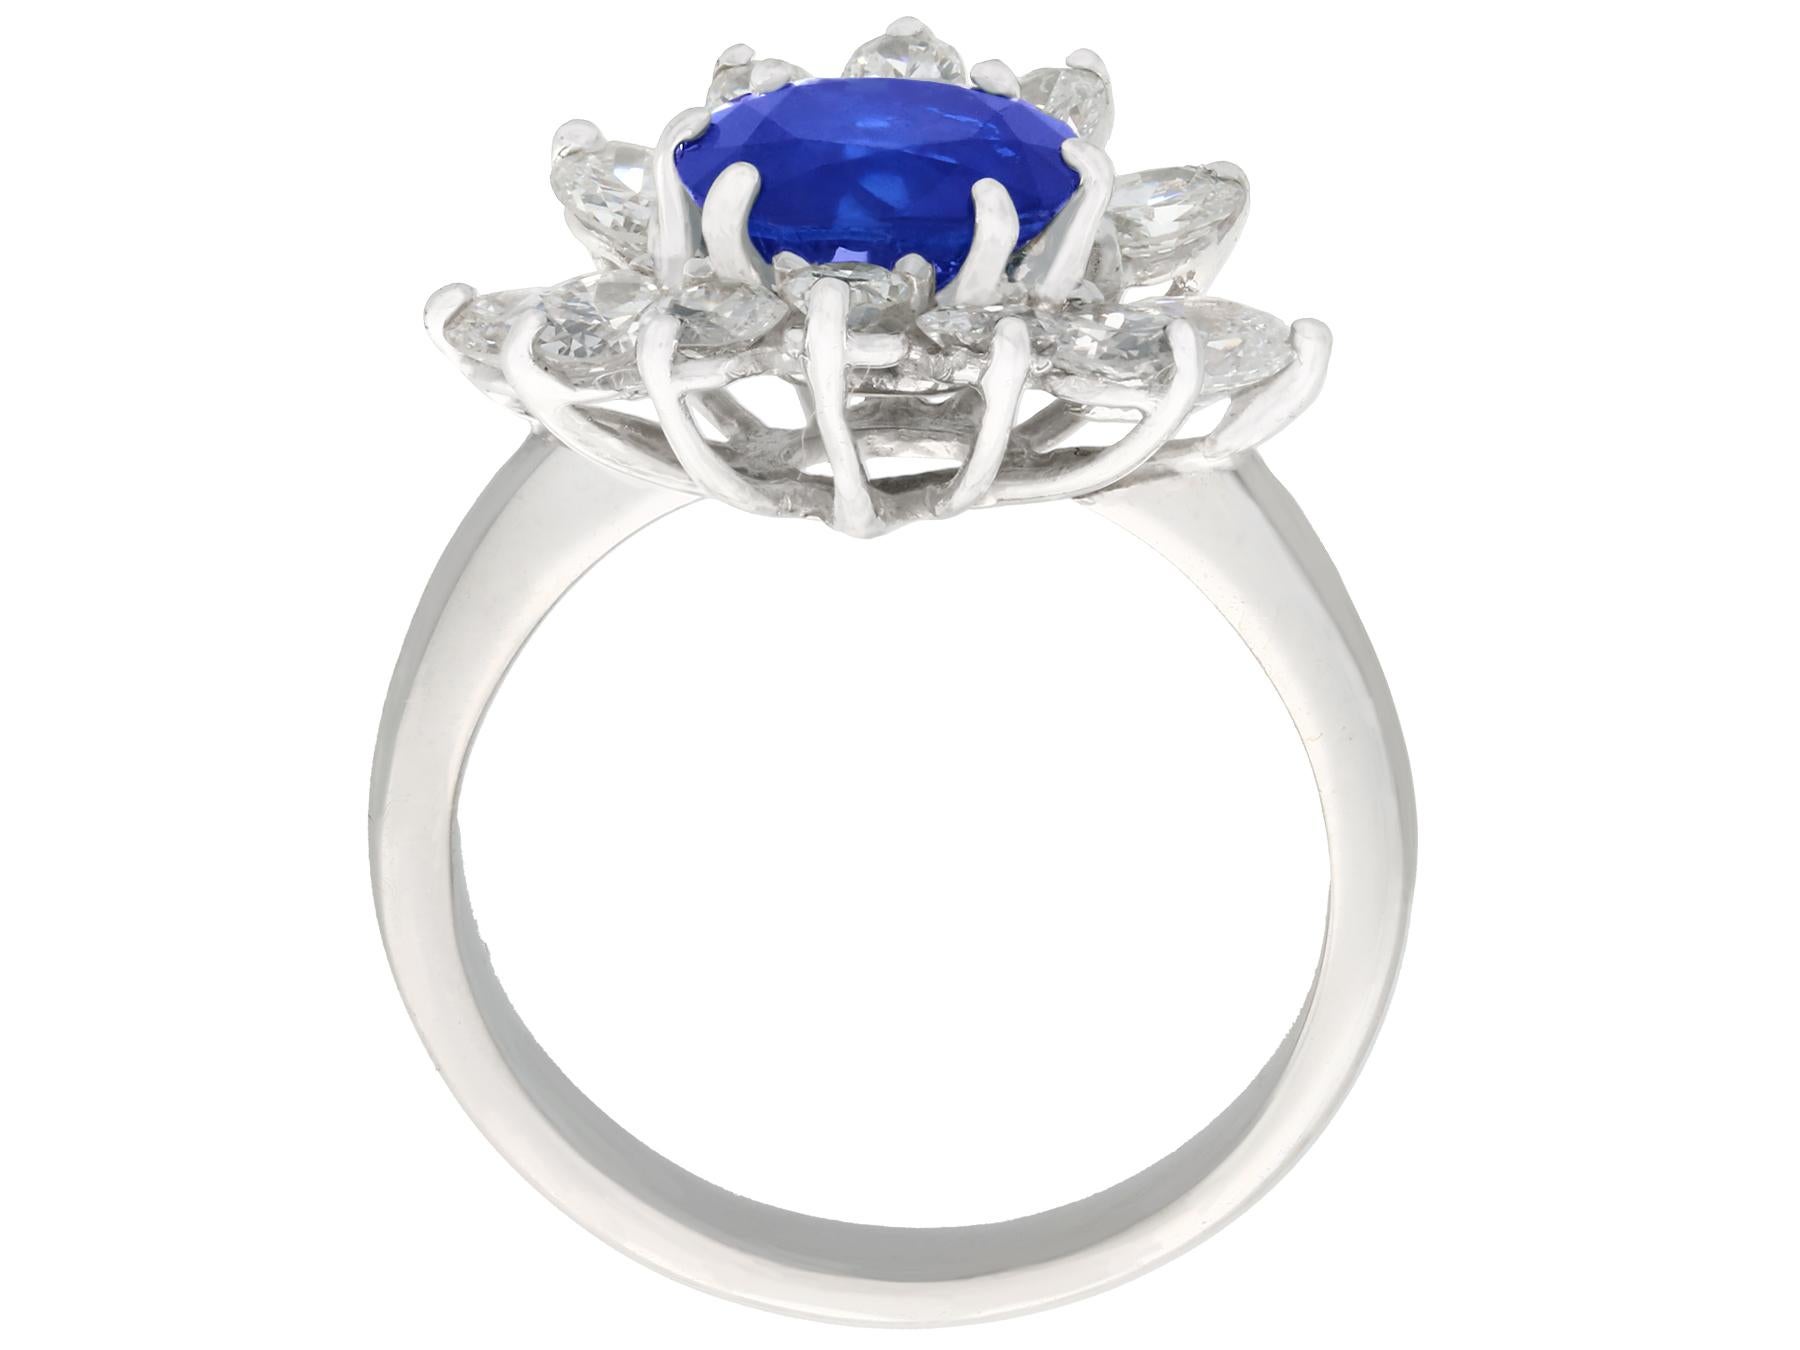 Women's 1970s 1.85 Carat Sapphire and 1.56 Carat Diamond White Gold Cocktail Ring